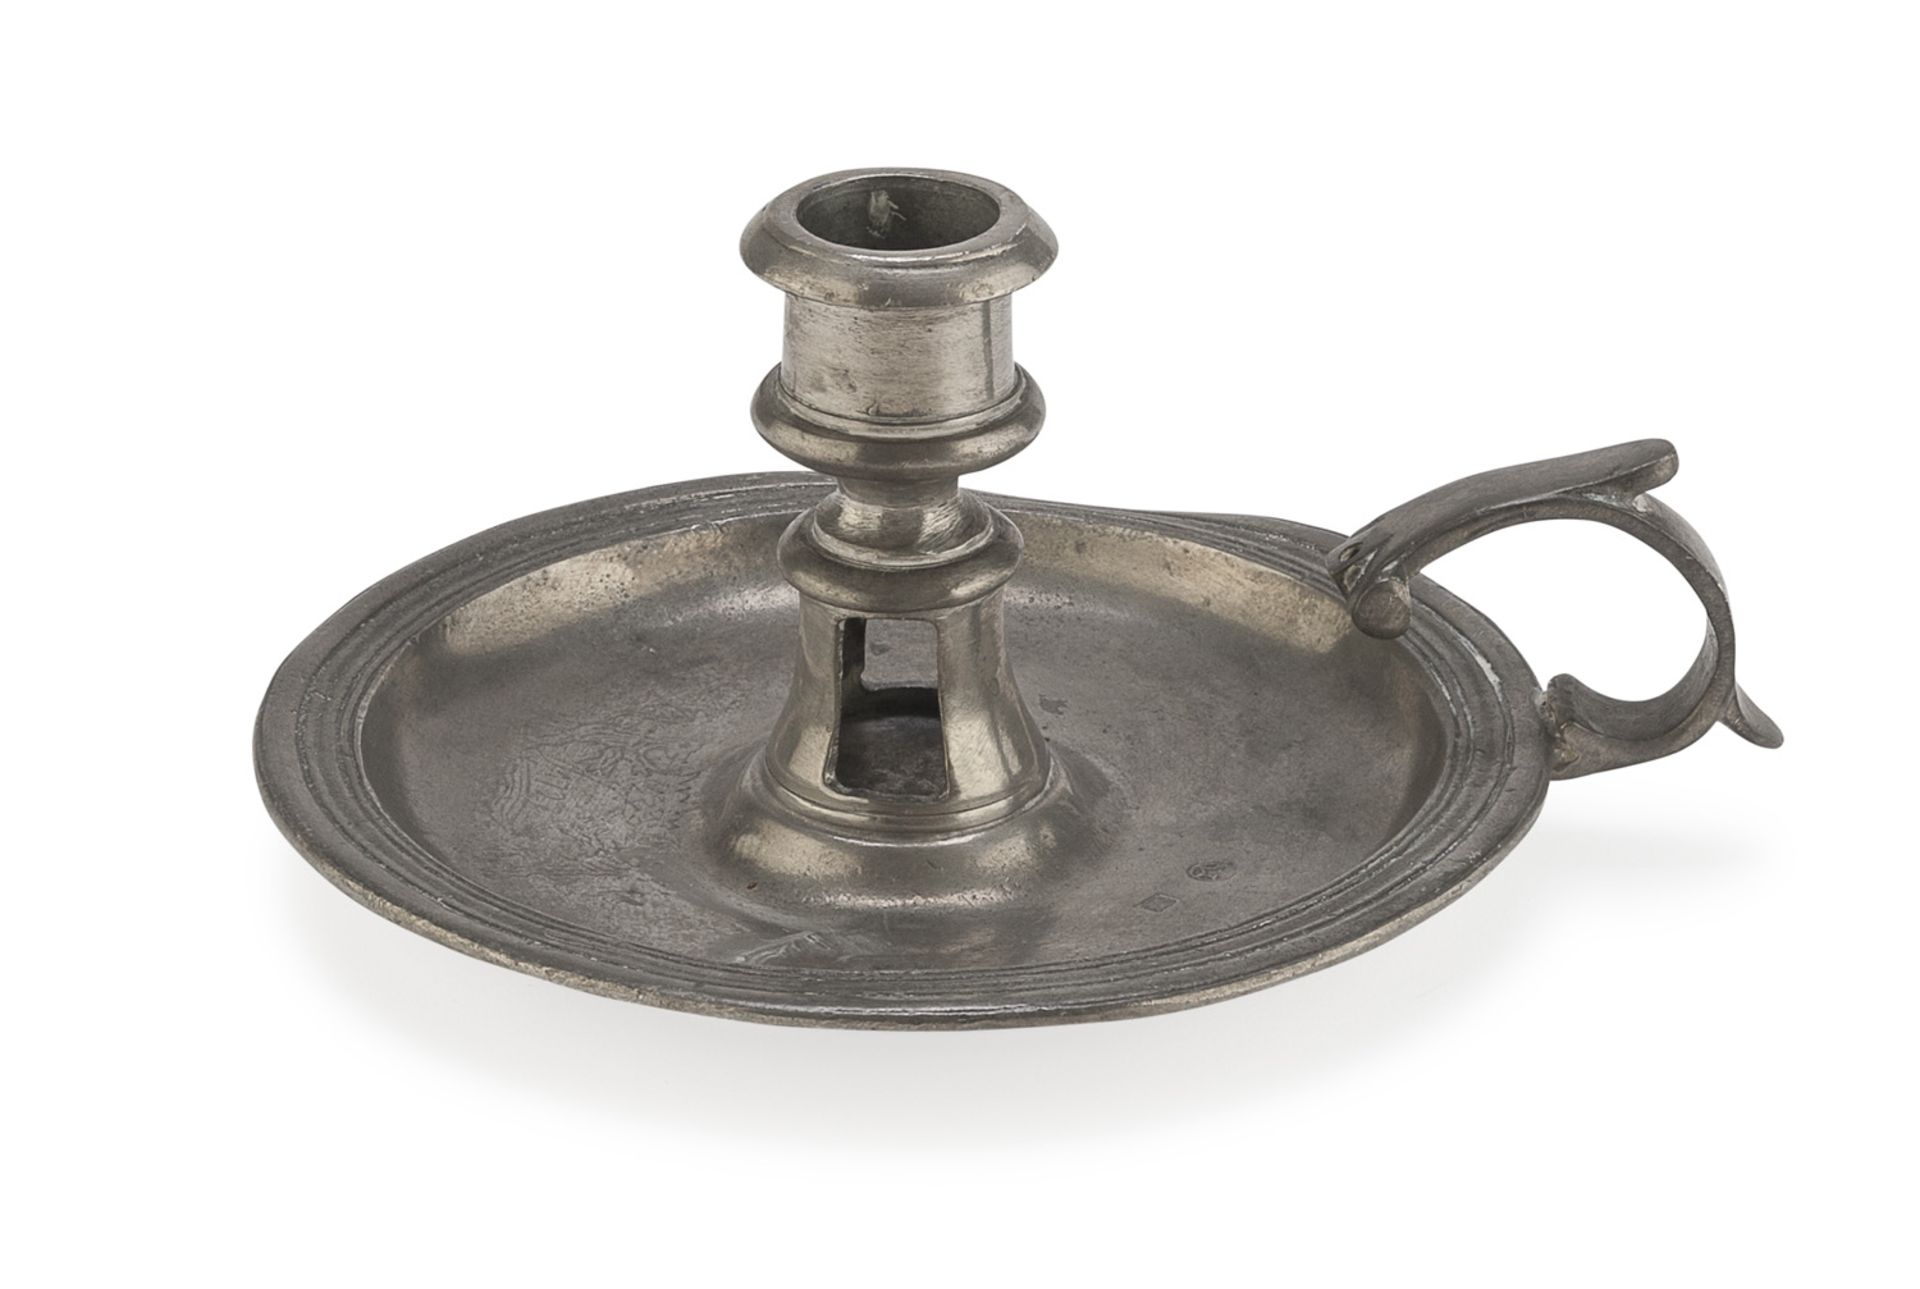 PEWTER CANDLESTICK PROBABLY UNITED KINGDOM 20TH CENTURY